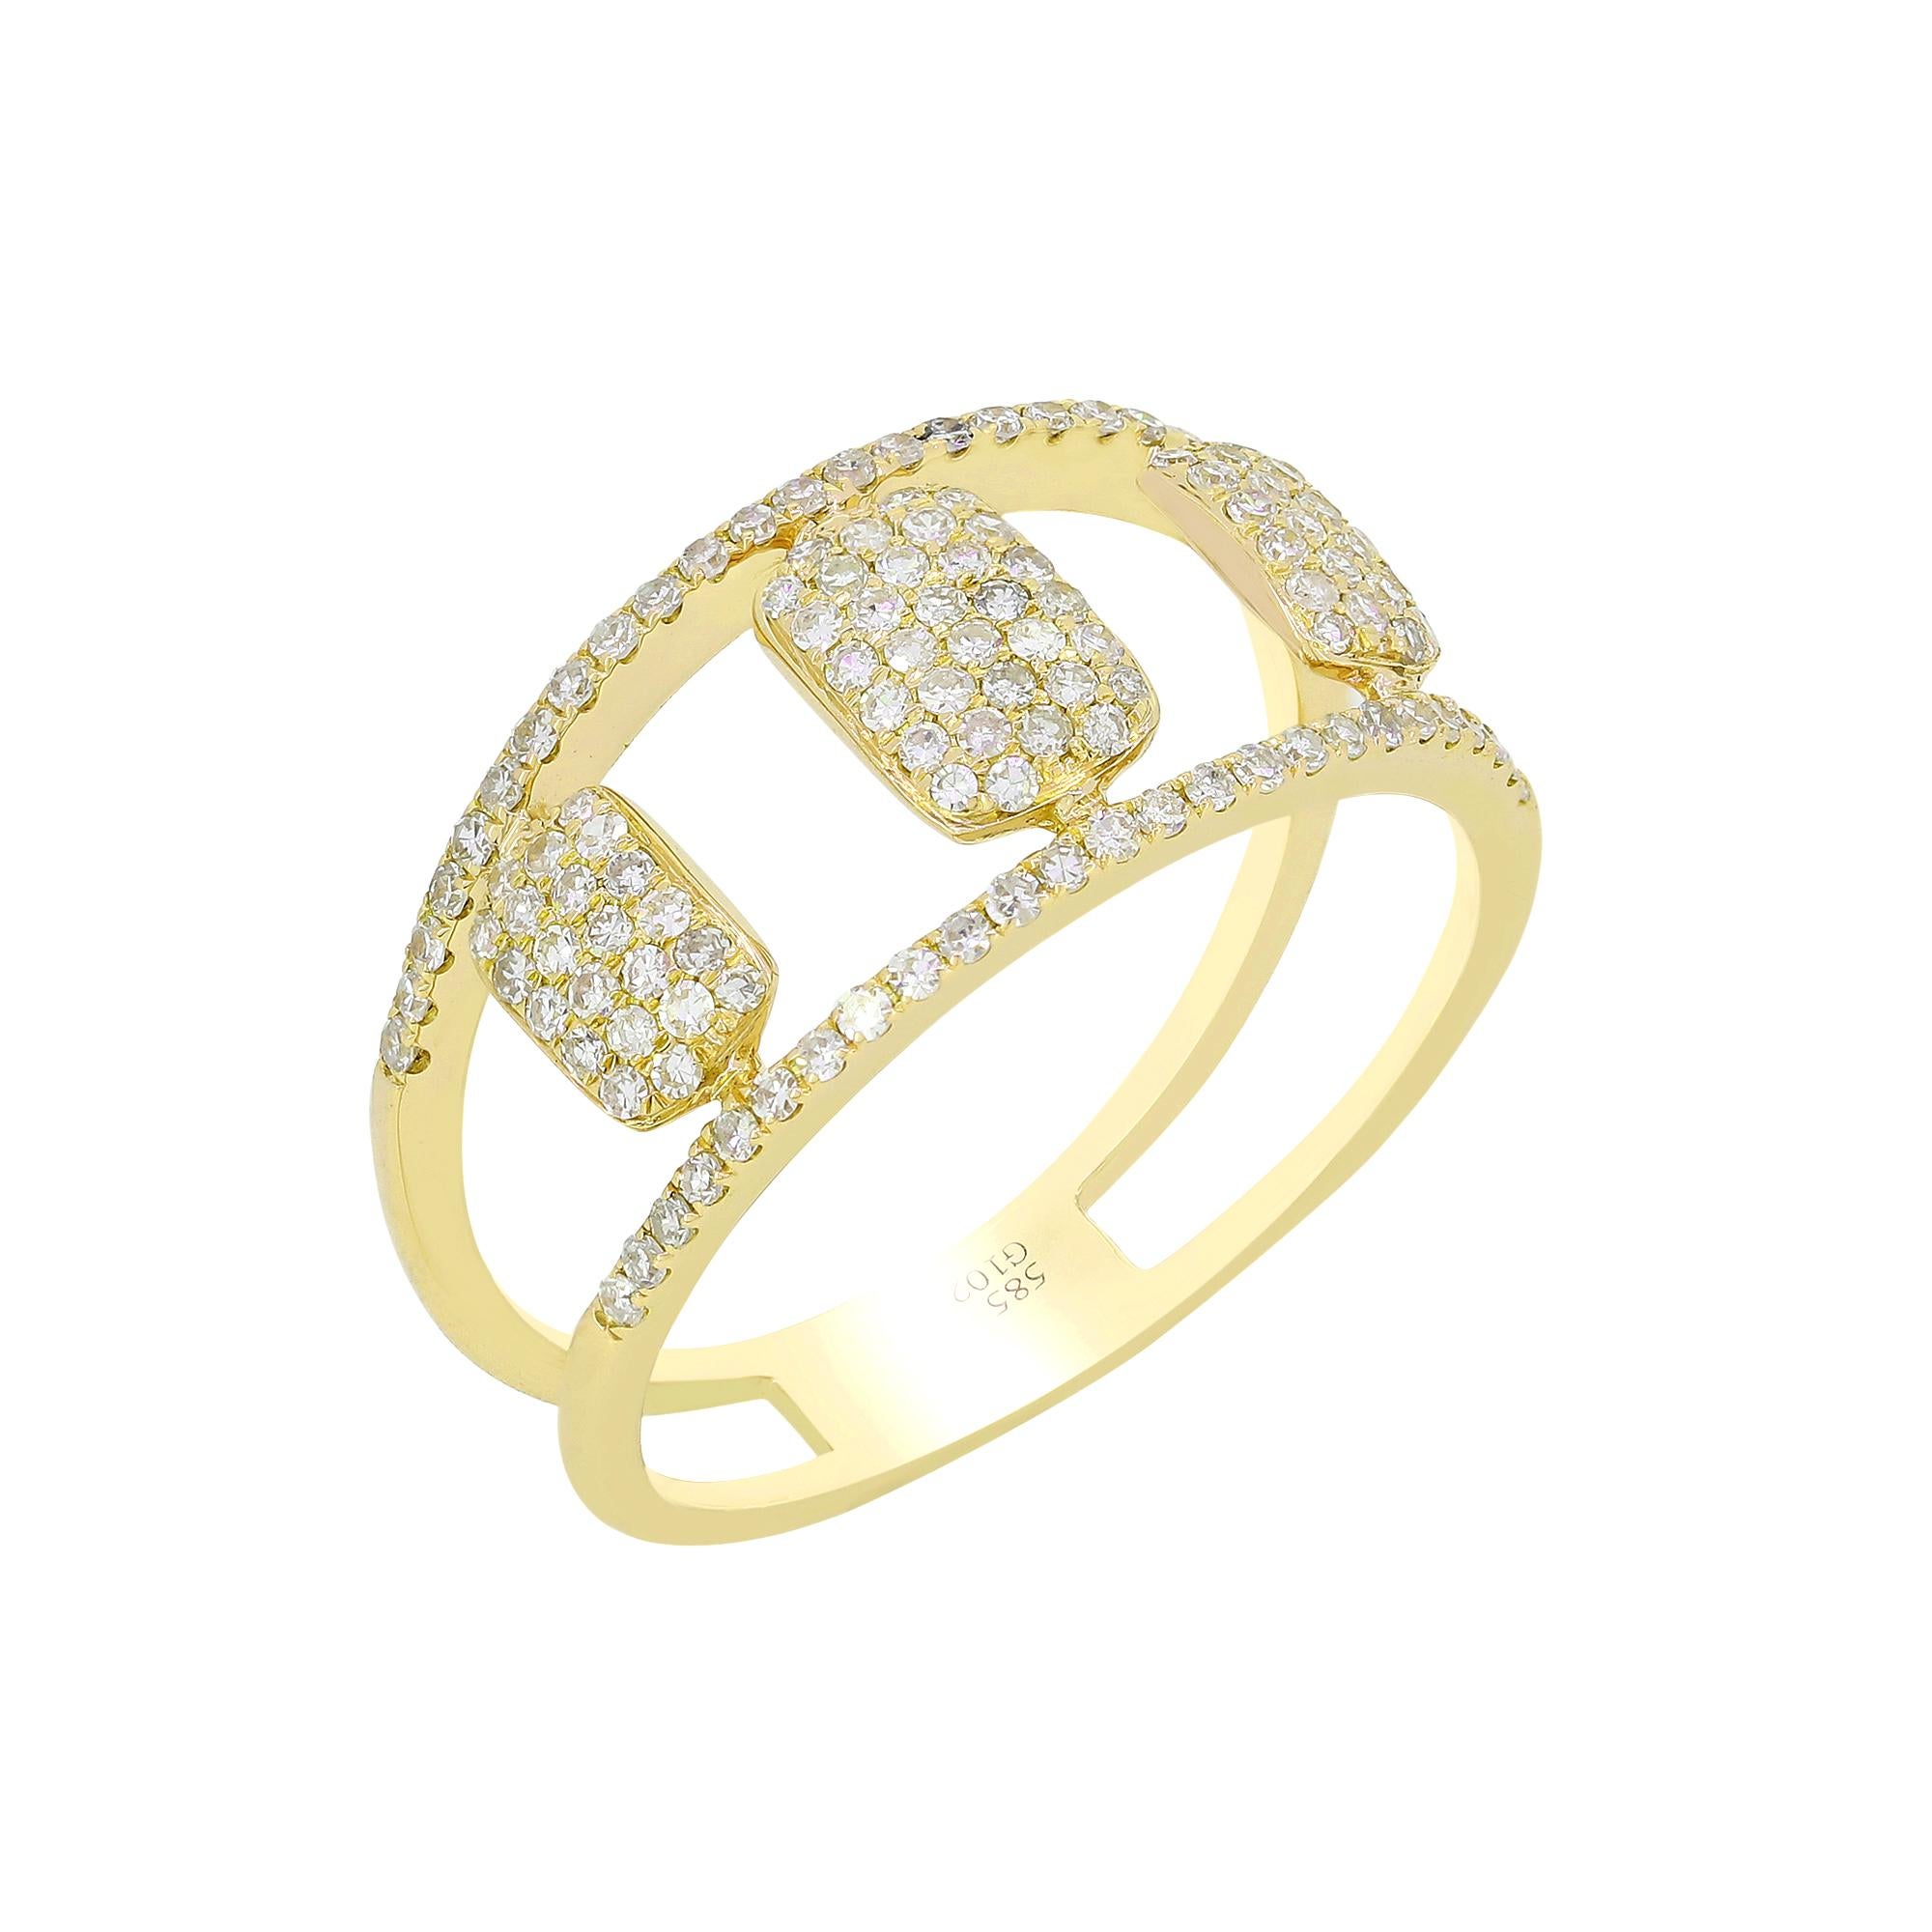 This Luxle classic split shank diamond ring is made of 14K yellow gold. The size 6 gold wedding ring is elegantly decorated with round single-cut diamonds in a micro pave setting. The diamonds are GH in color and SI1 in clarity. The total weight of